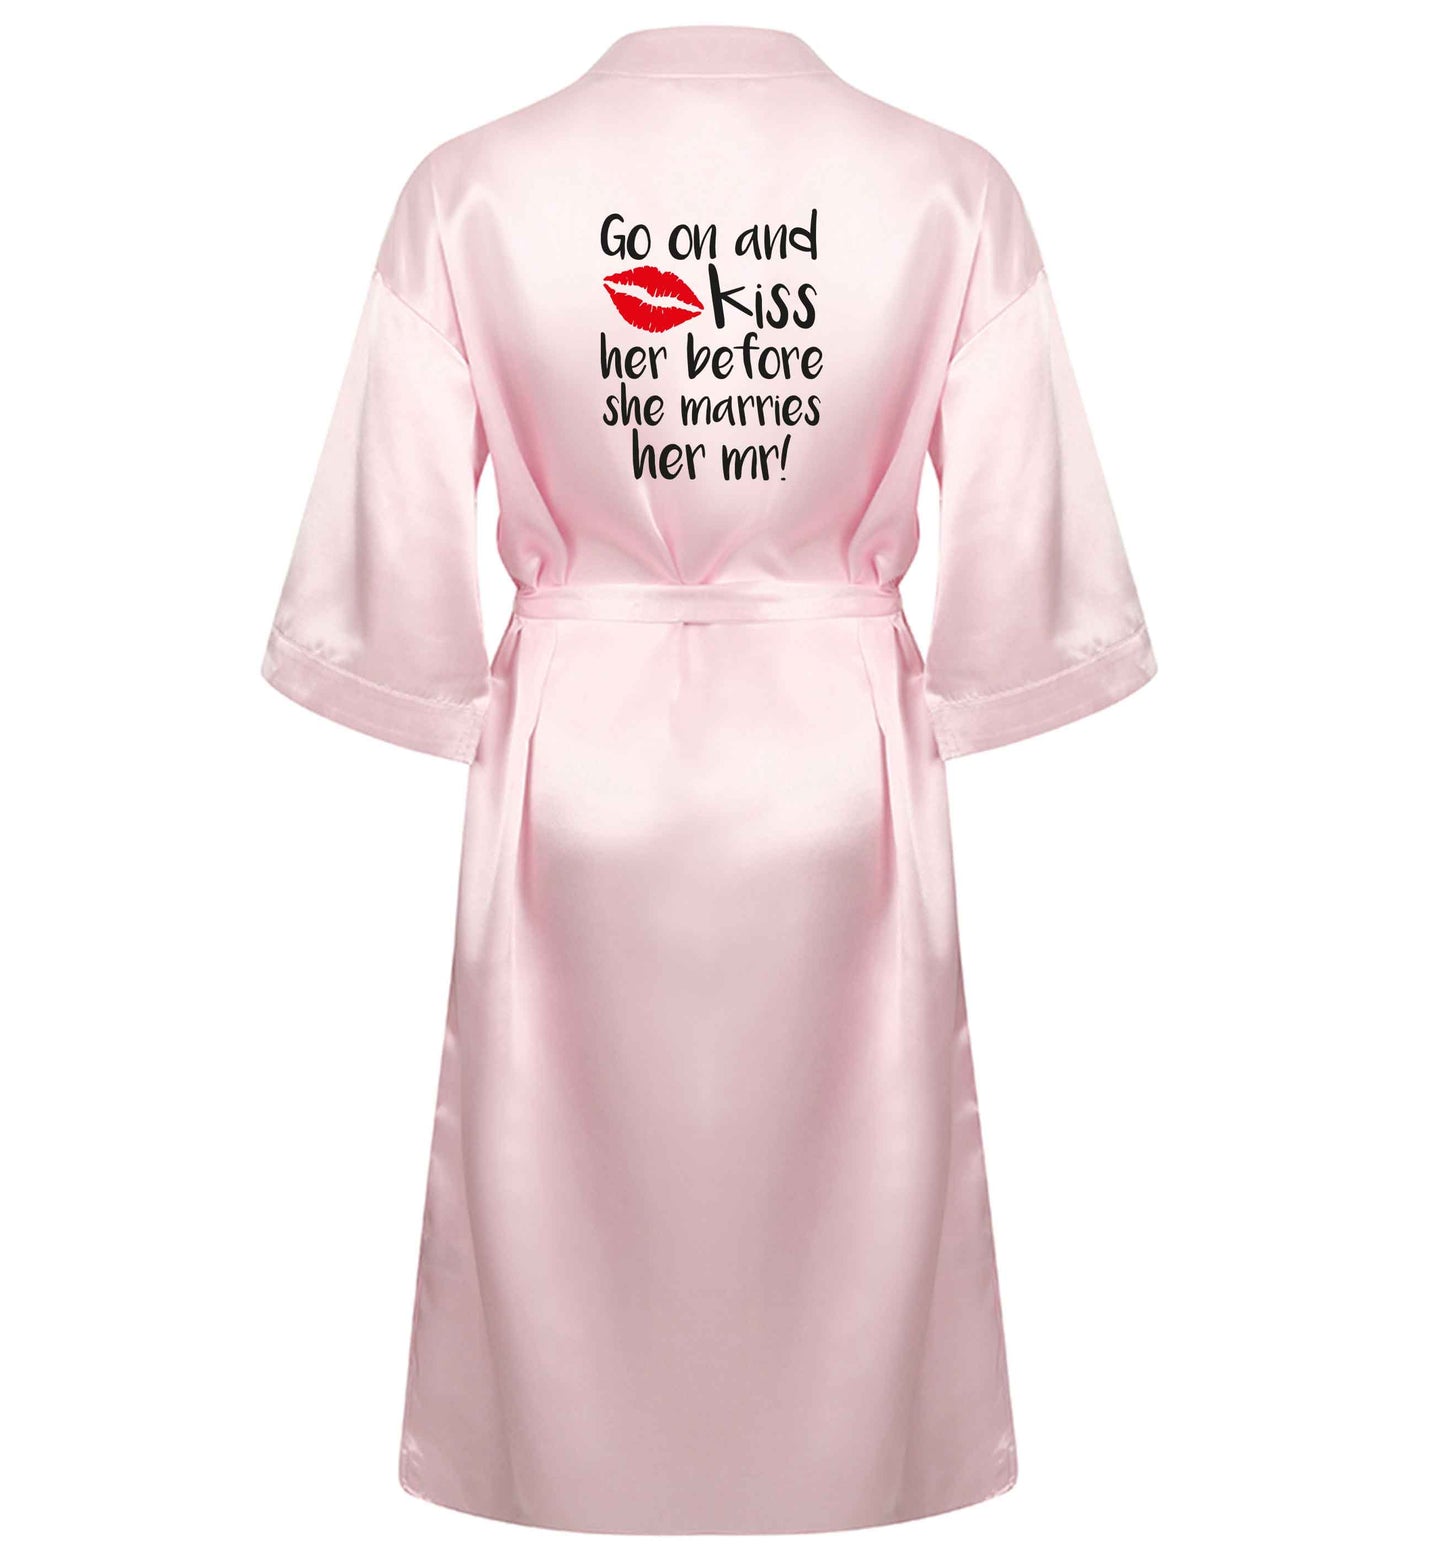 Kiss her before she marries her mr! XL/XXL pink  ladies dressing gown size 16/18